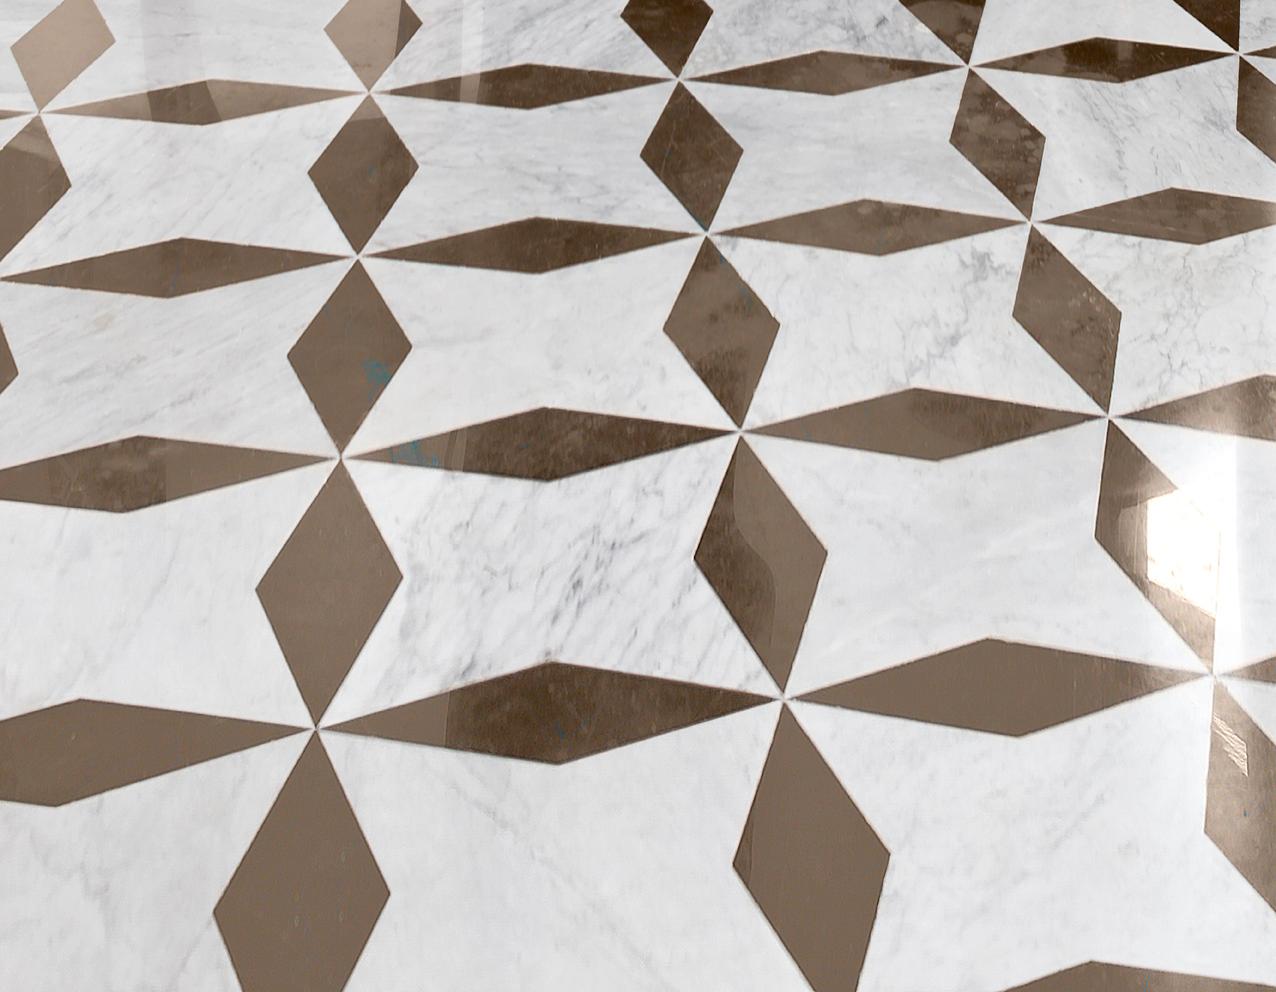 Modern Floor Waterjet Cut Marble Tiles Available in Different Marbles Combination For Sale